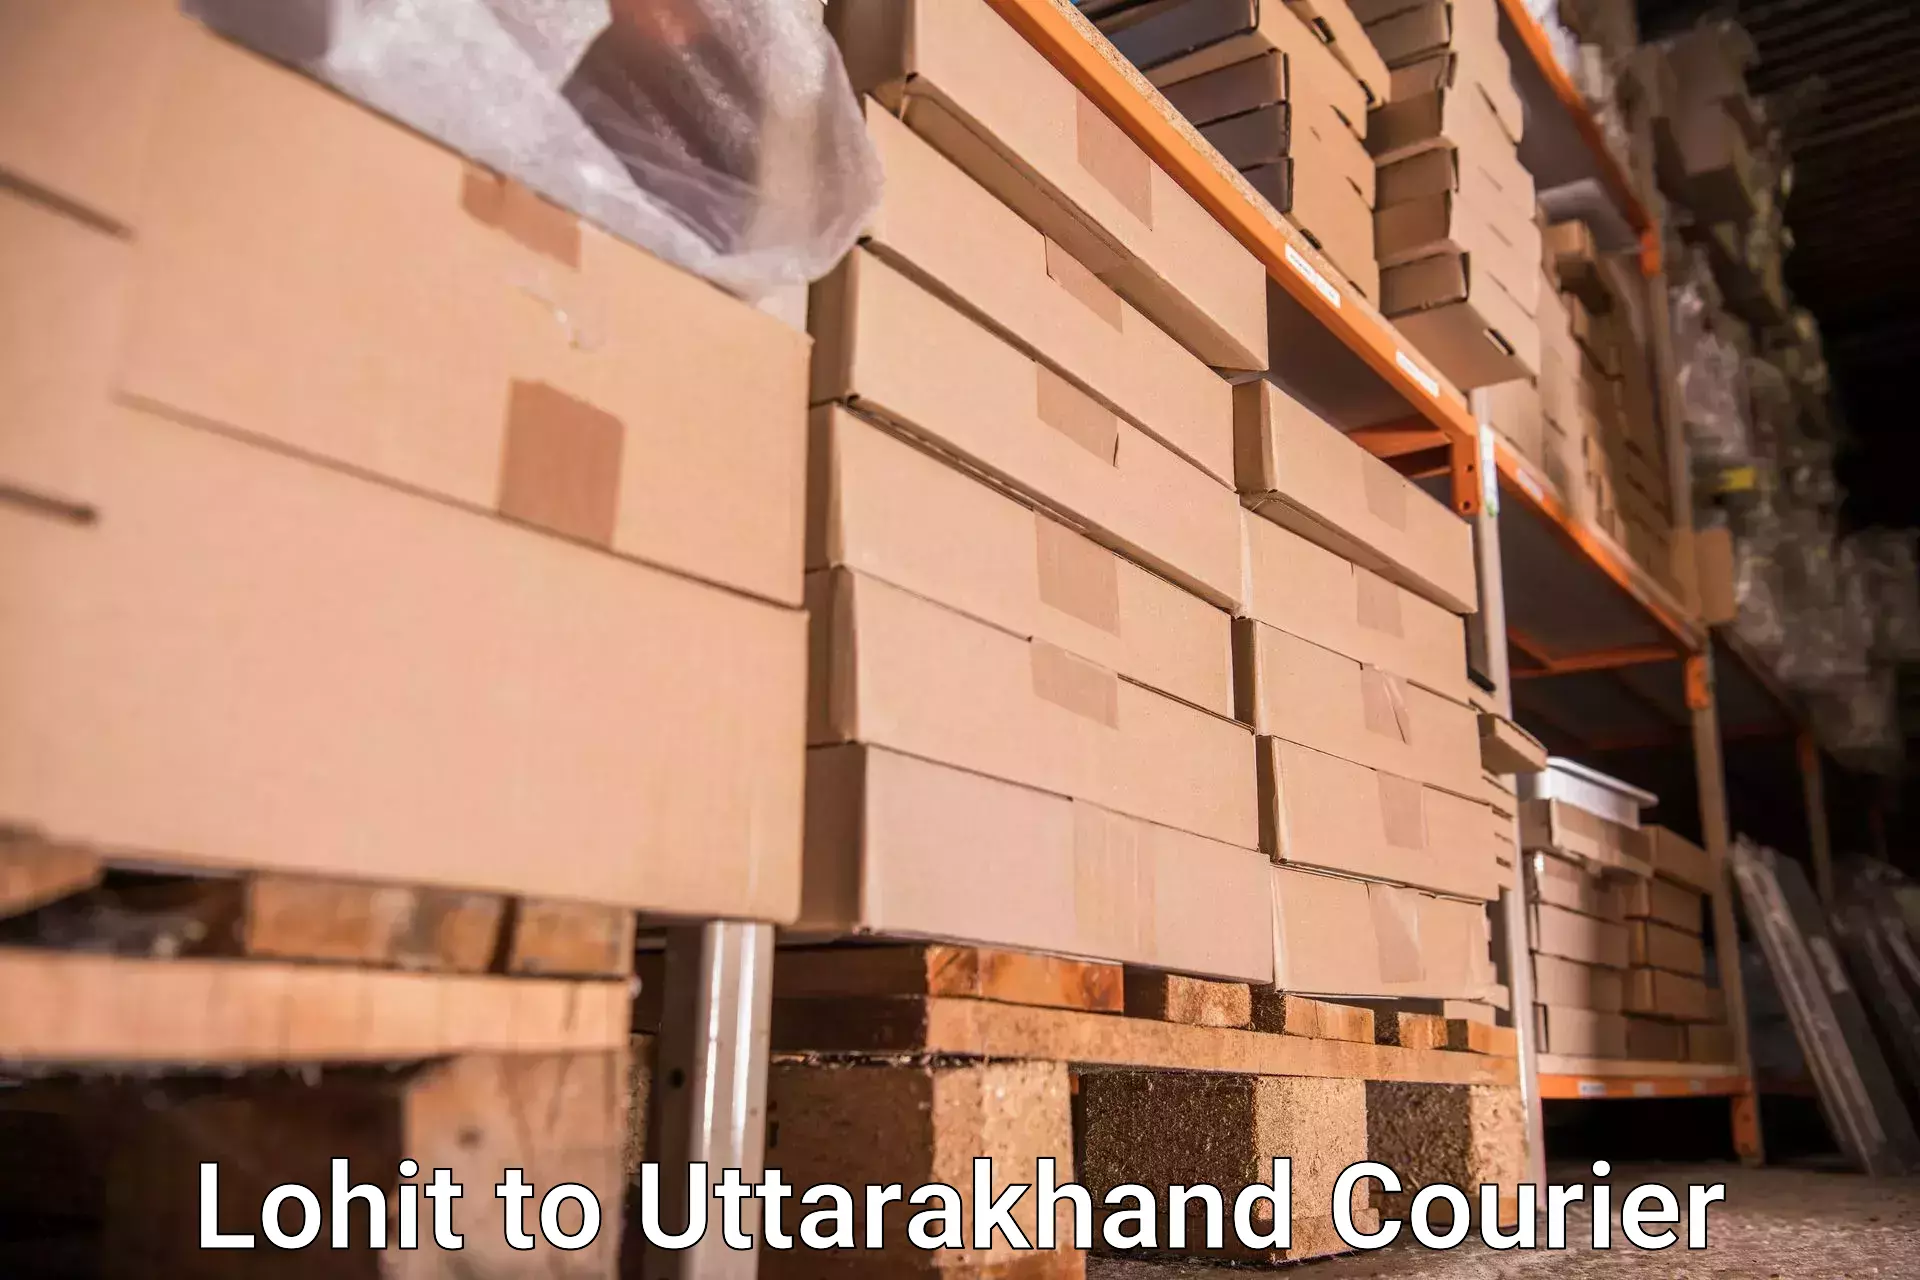 Luggage shipment tracking Lohit to IIT Roorkee